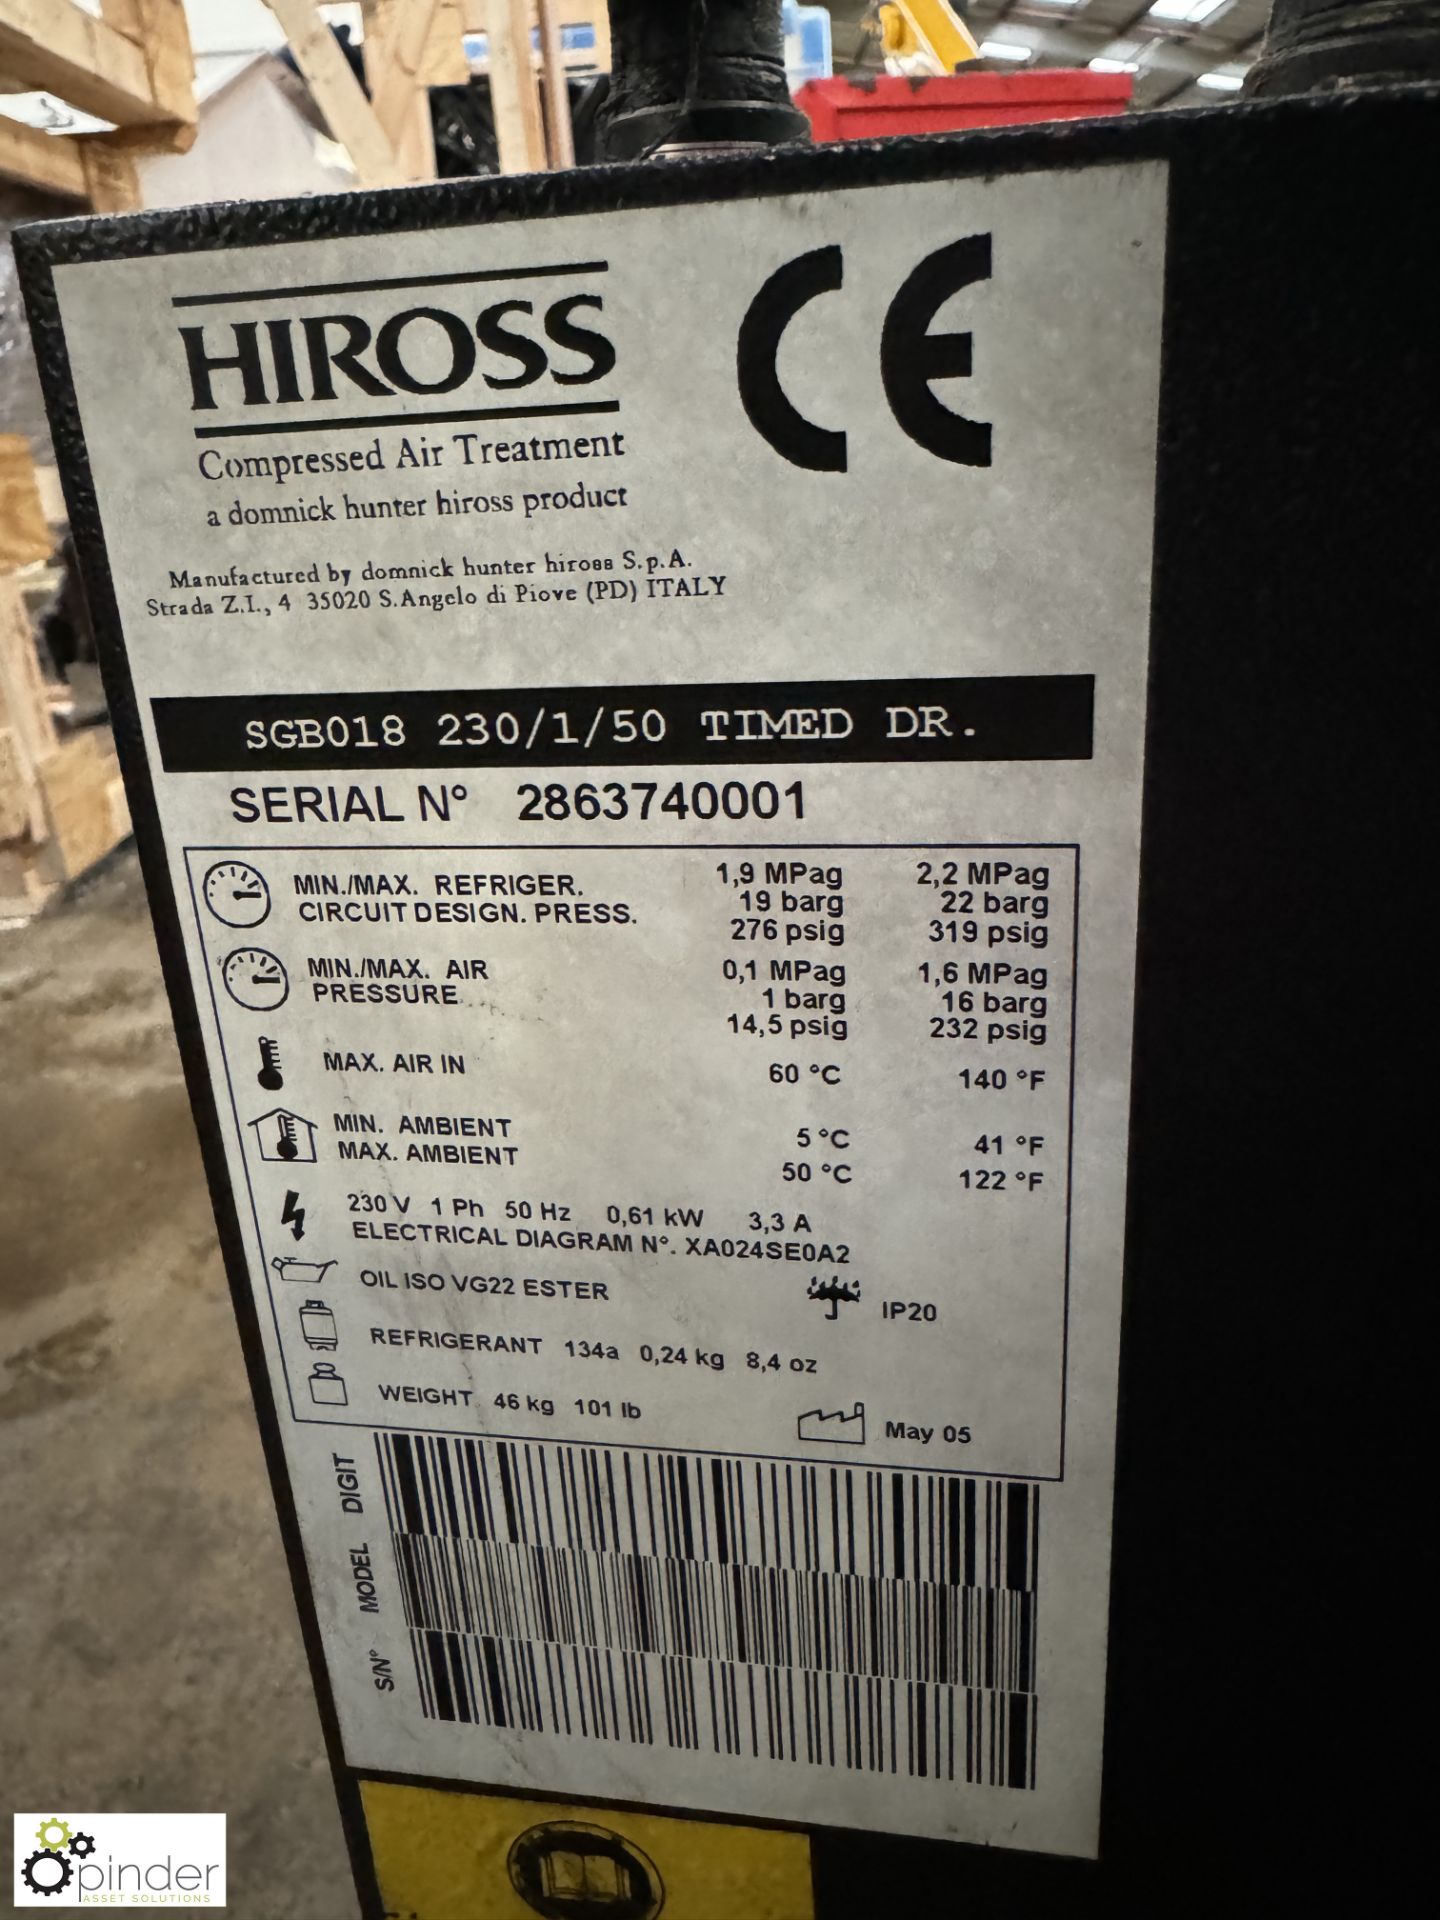 Hiross Starlette Compressed Air Dryer, serial number 2863740001 (LOCATION: Middleton, Manchester) - Image 3 of 5